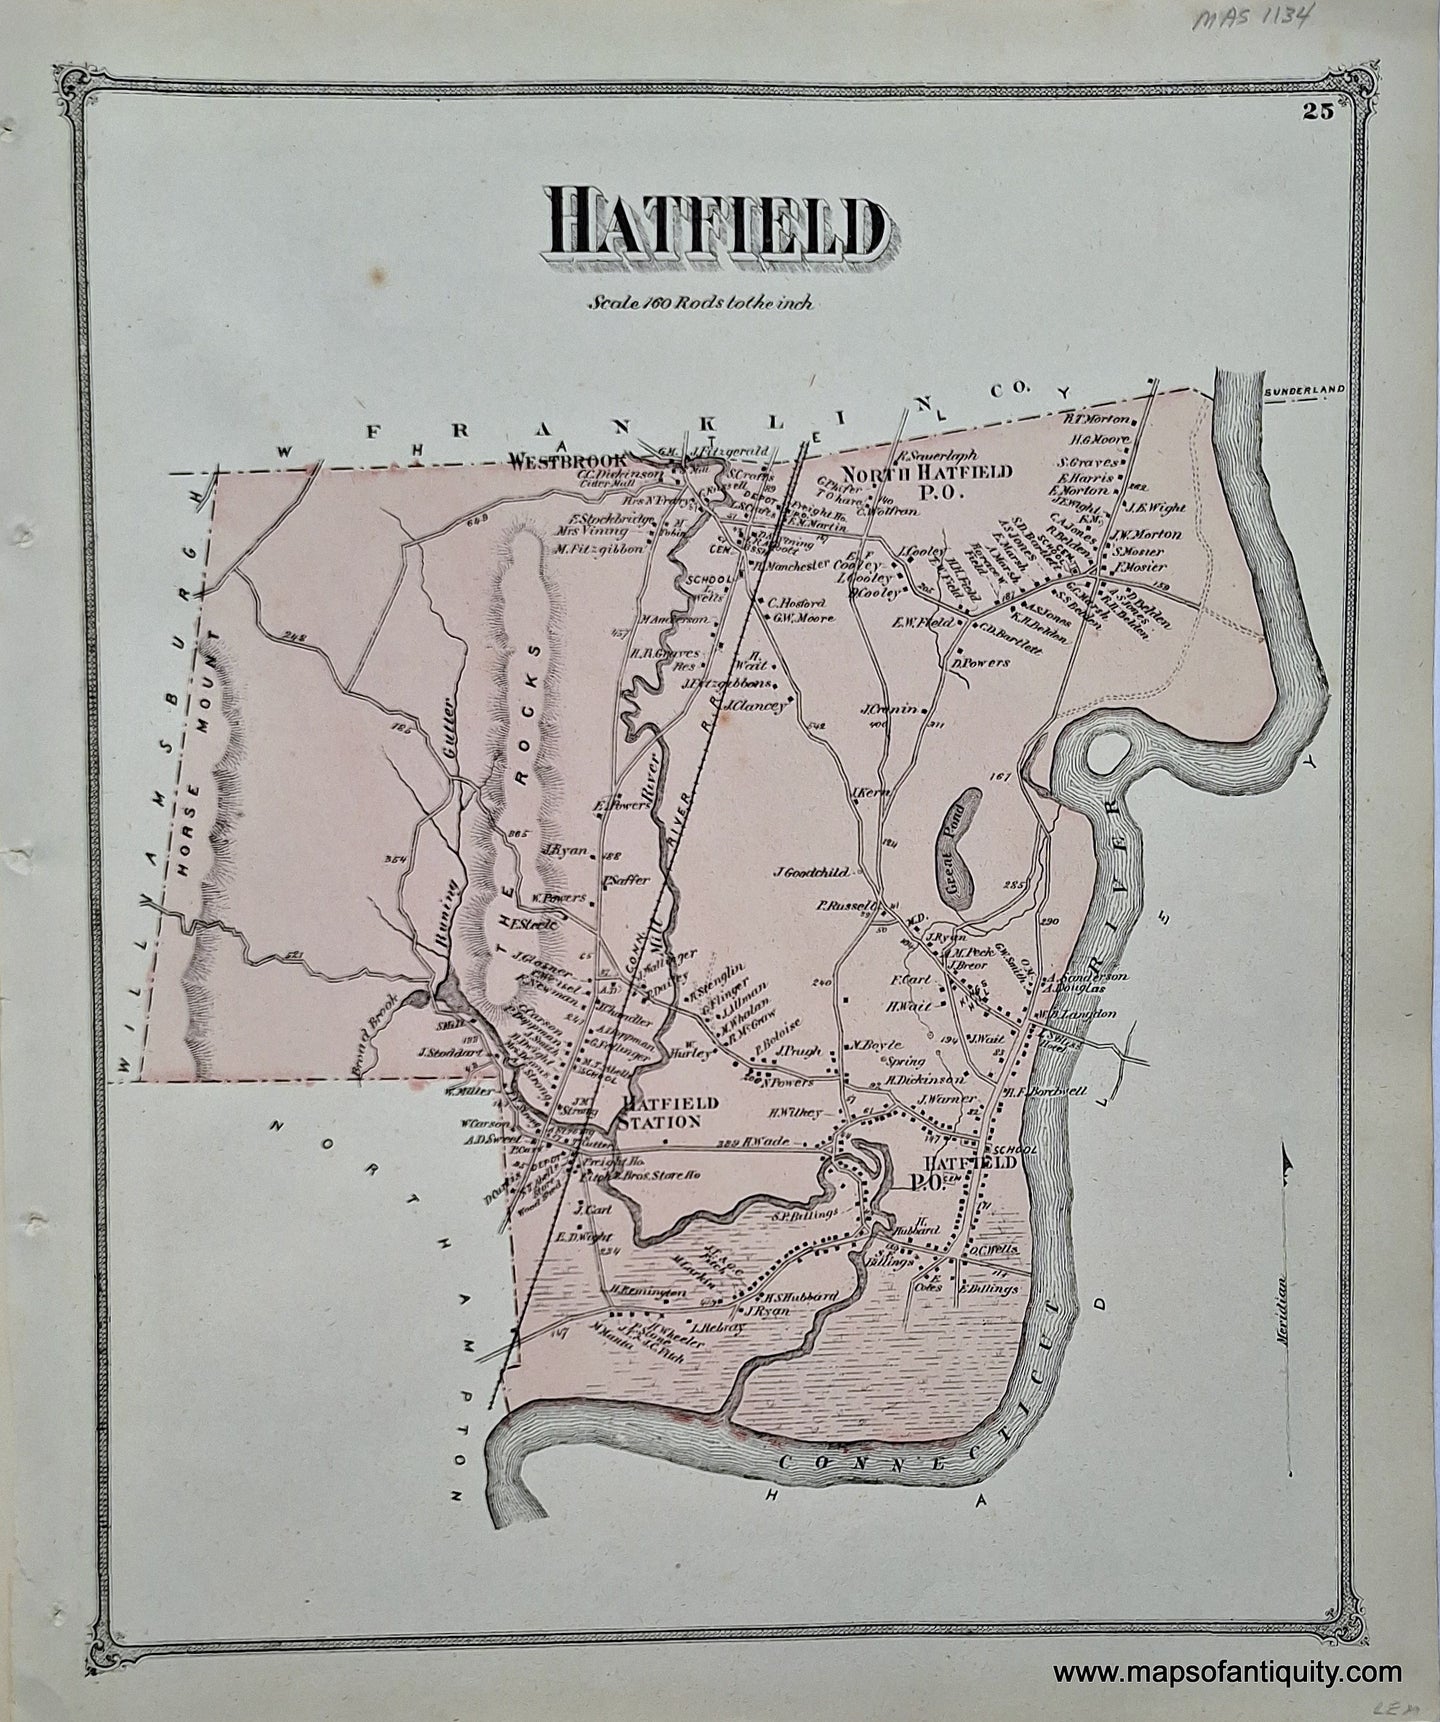 Antique-Hand-Colored-Map-Hatfield-p.-25-(MA)-Massachusetts-Hampshire-County-1873-Beers-Maps-Of-Antiquity